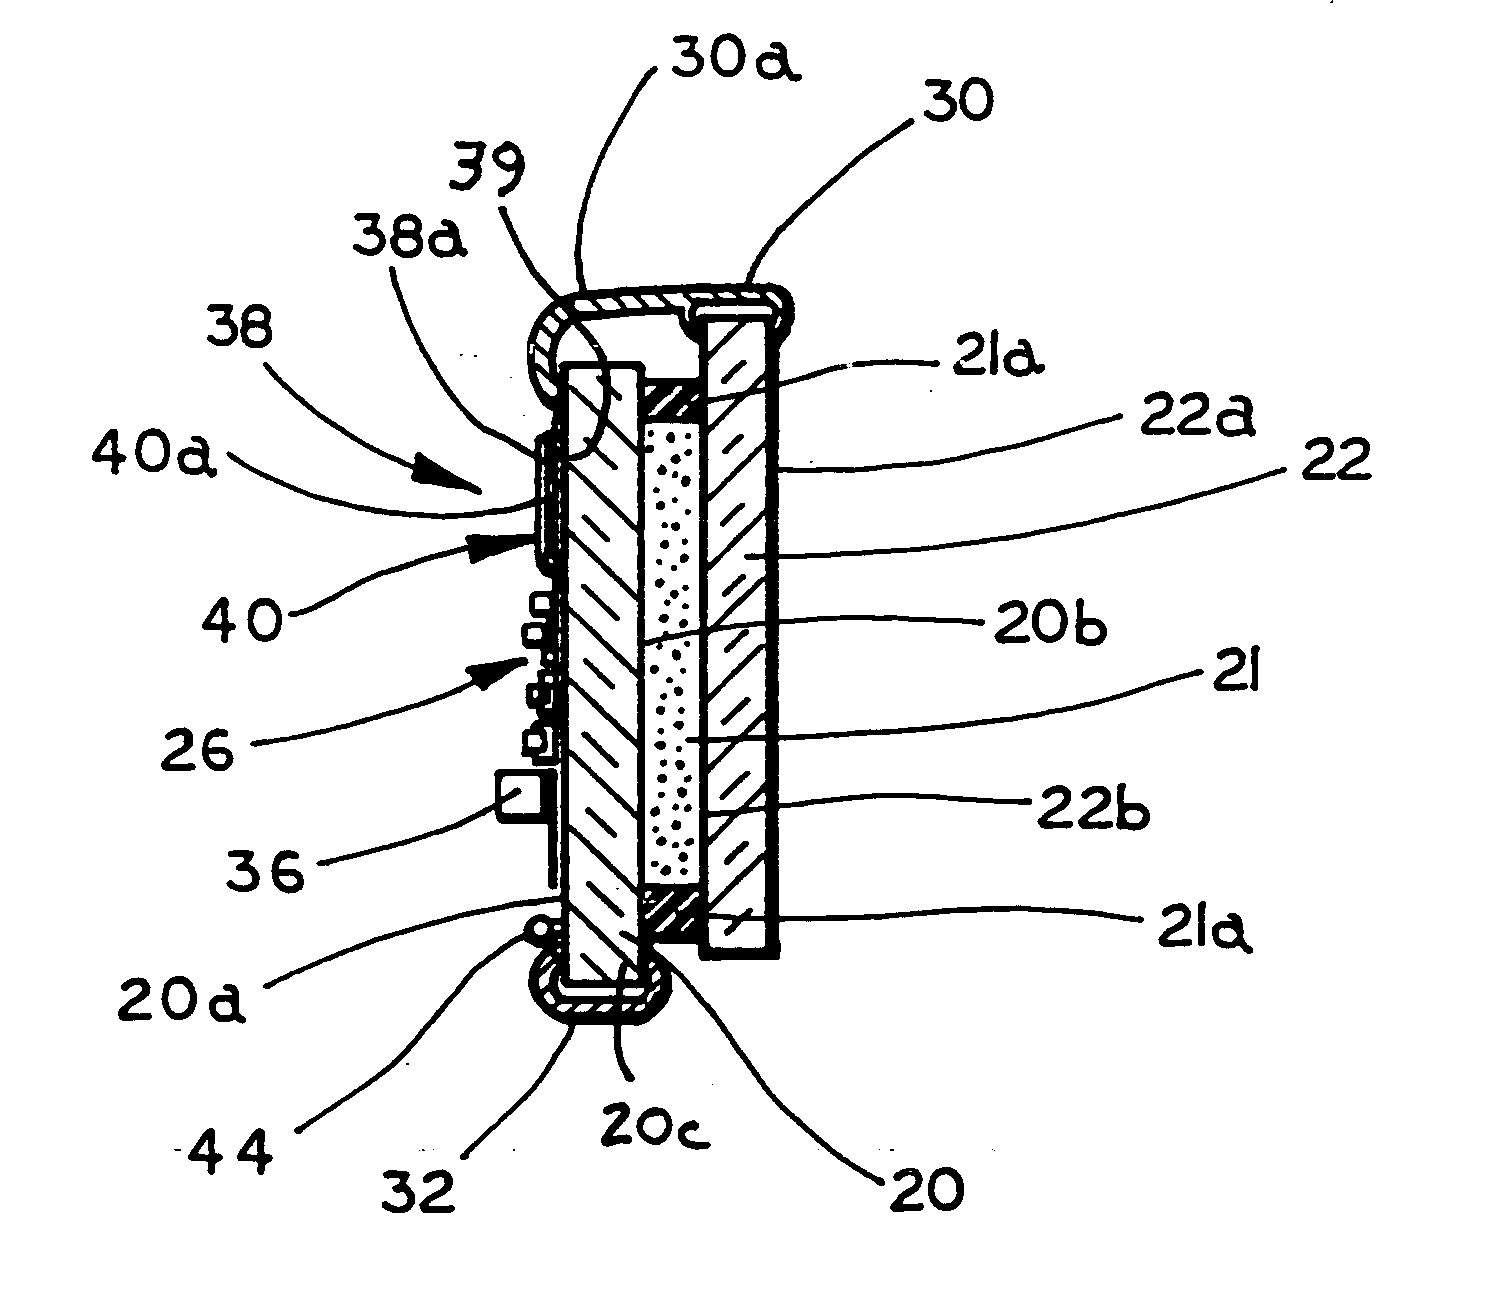 Mirror reflective element assembly including electronic component